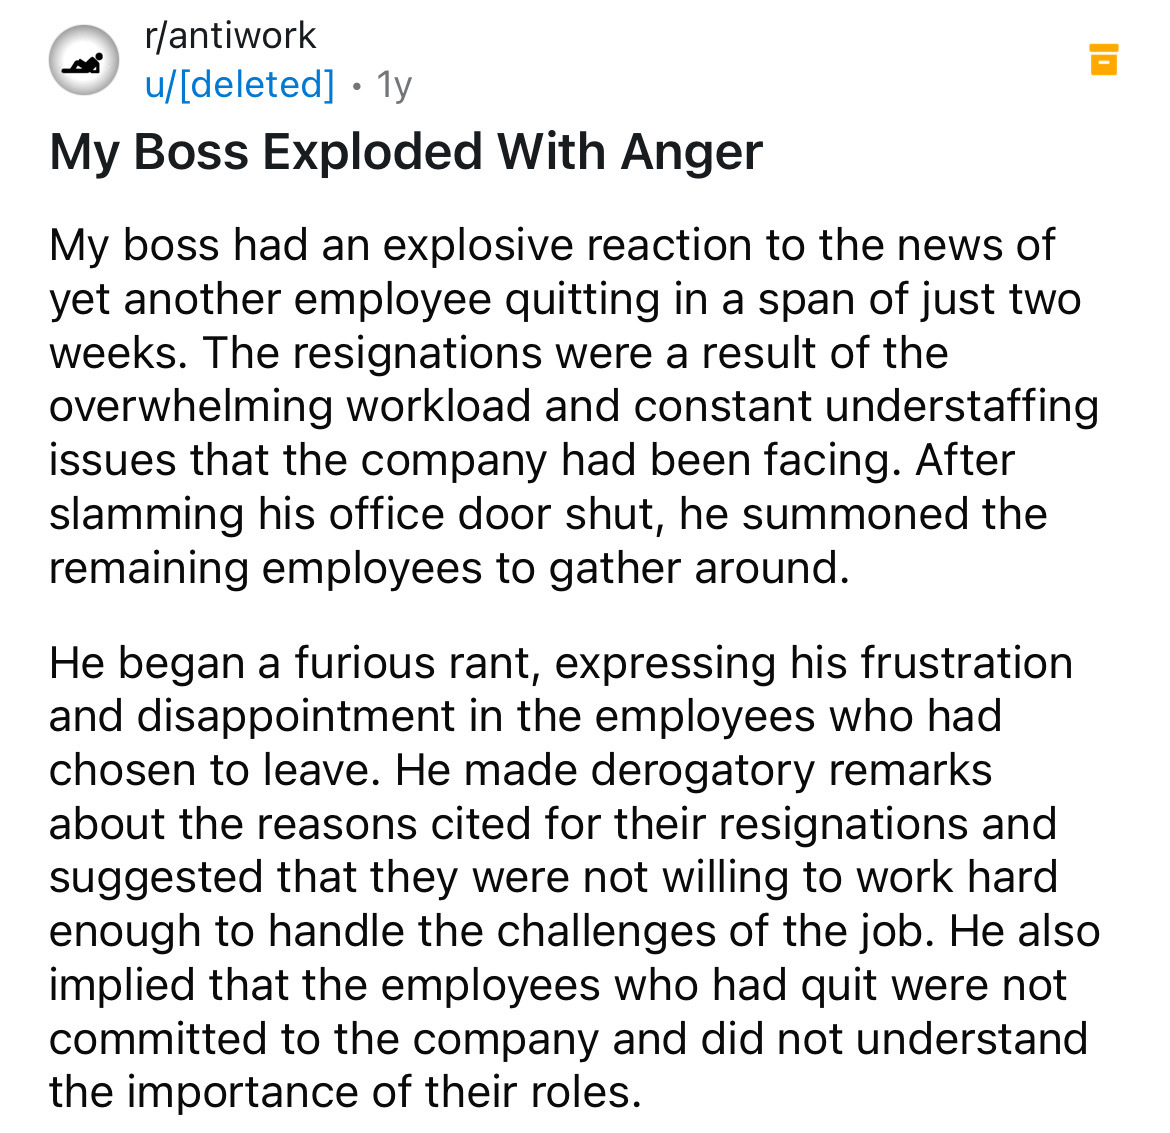 document - rantiwork . udeleted 1y My Boss Exploded With Anger My boss had an explosive reaction to the news of yet another employee quitting in a span of just two weeks. The resignations were a result of the overwhelming workload and constant understaffi